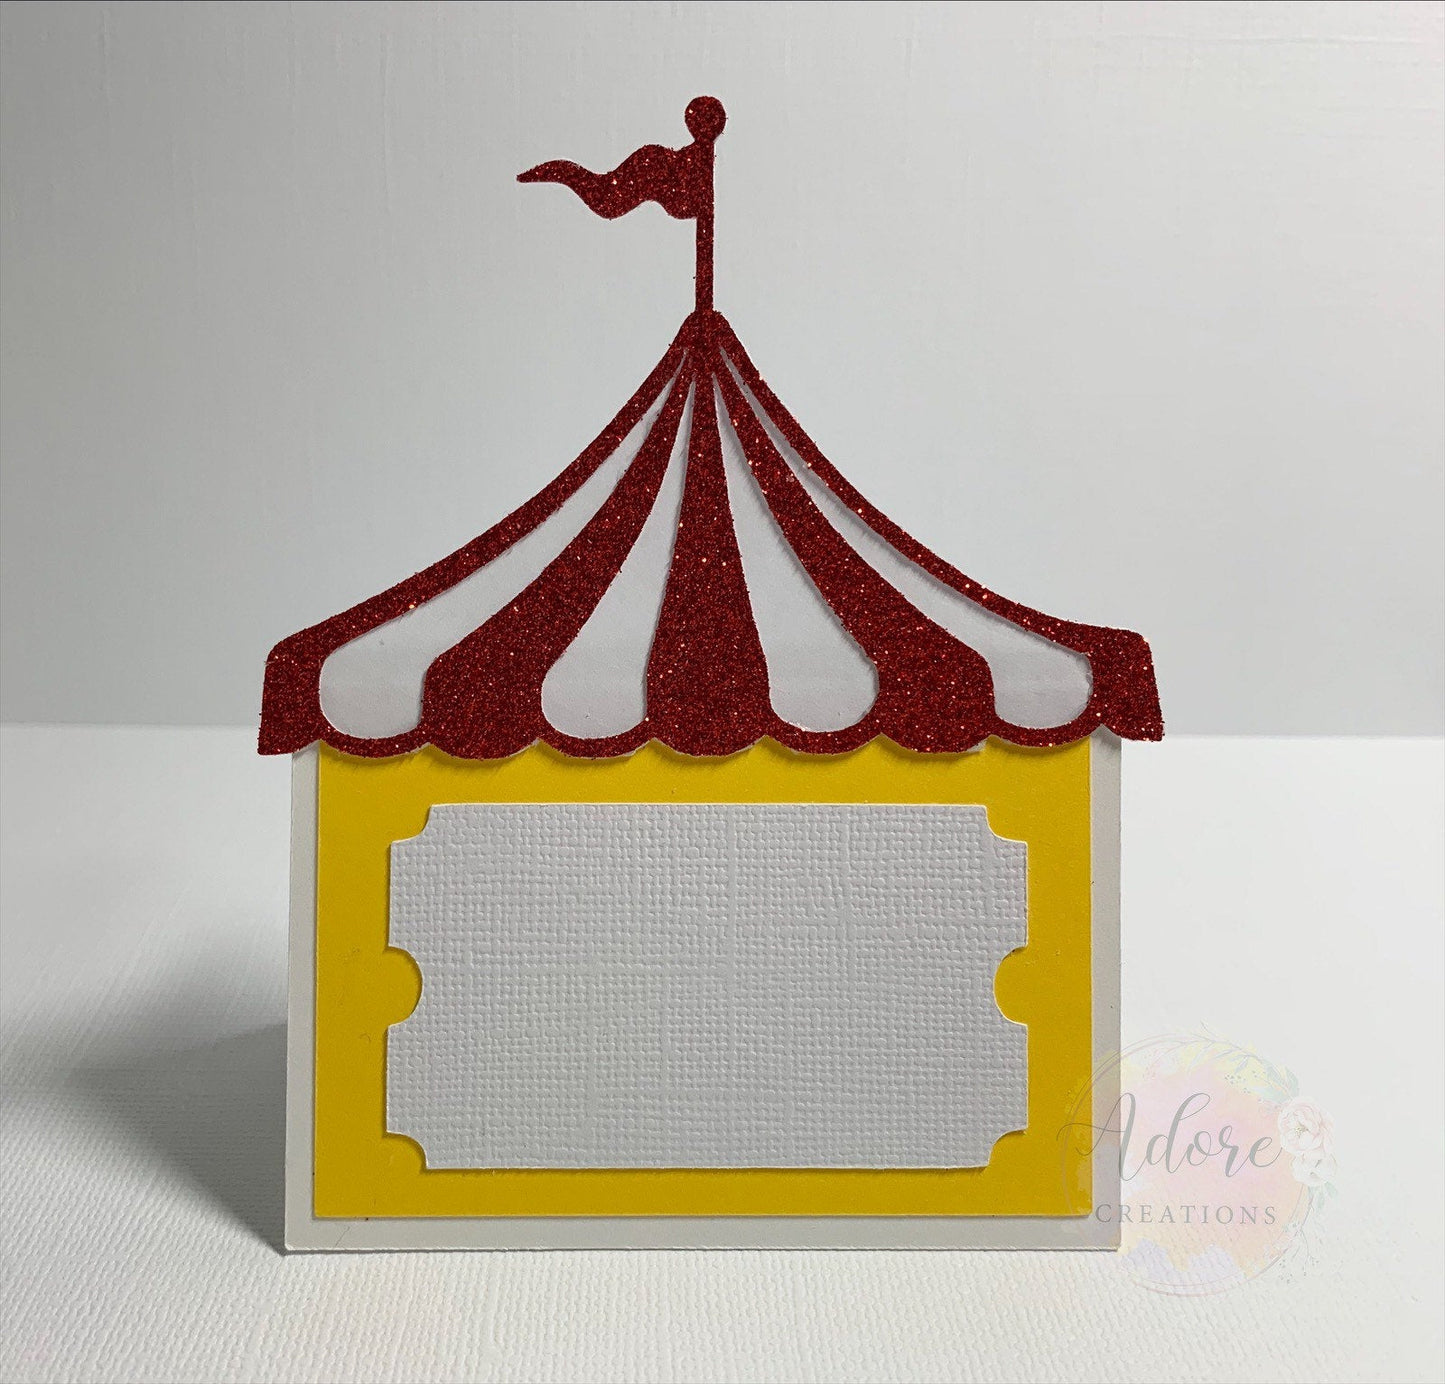 Circus Party Food Tents, Circus Food Place Cards, Circus Food Labels, Set of 10